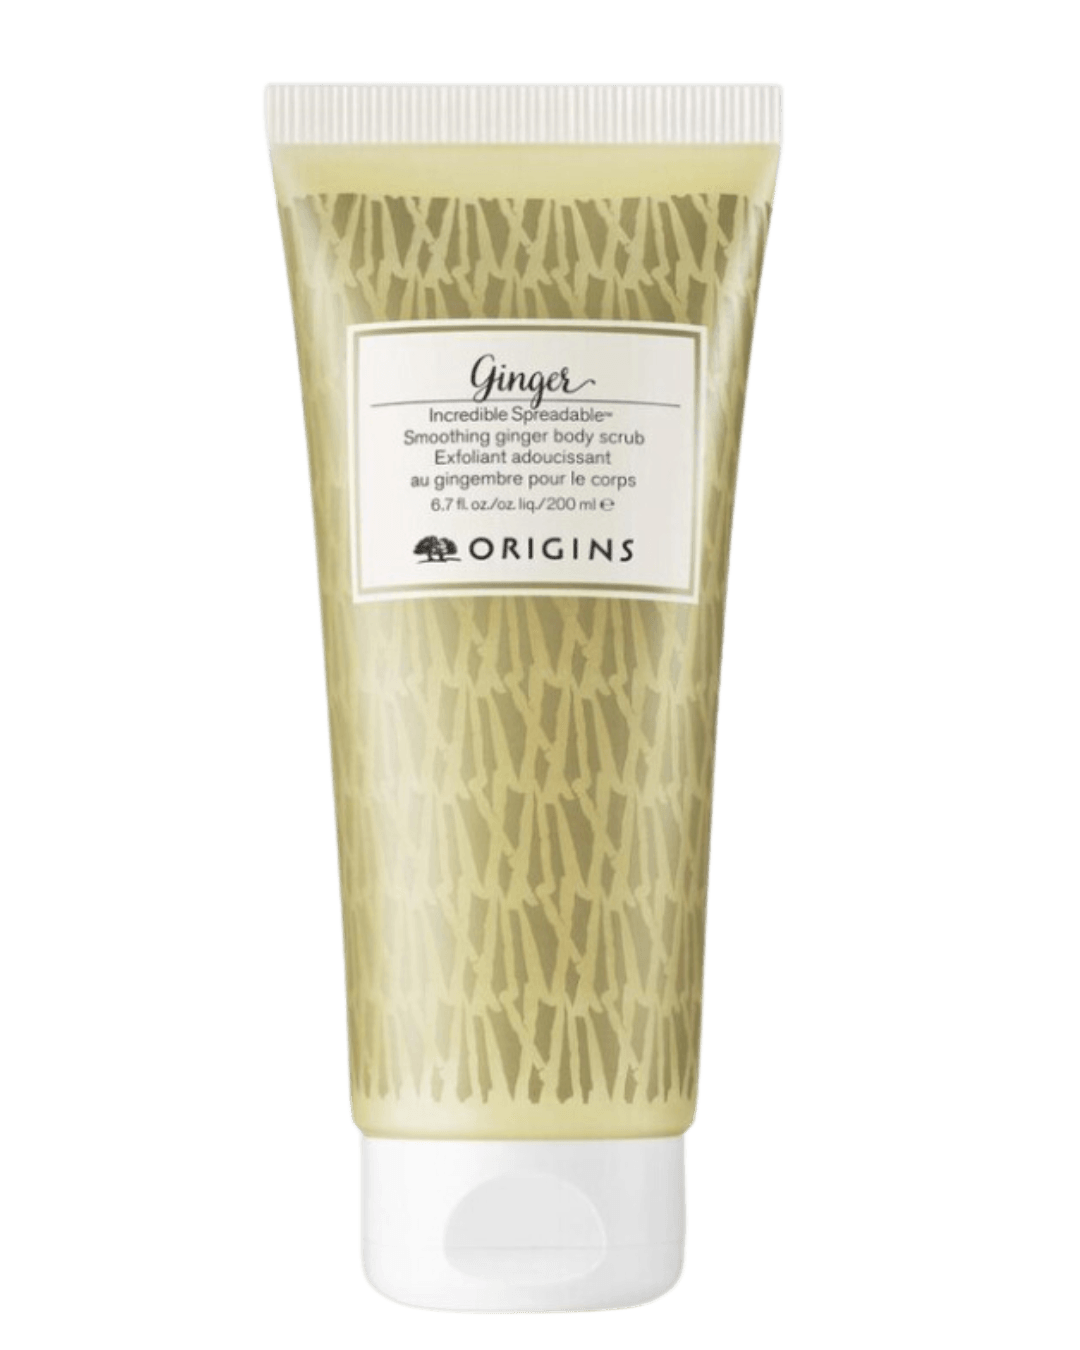 Daily Vanity Beauty Awards 2024 Best Body care Origins &#8211; Incredible Spreadable™ Smoothing Ginger Body Scrub Voted By Beauty Experts